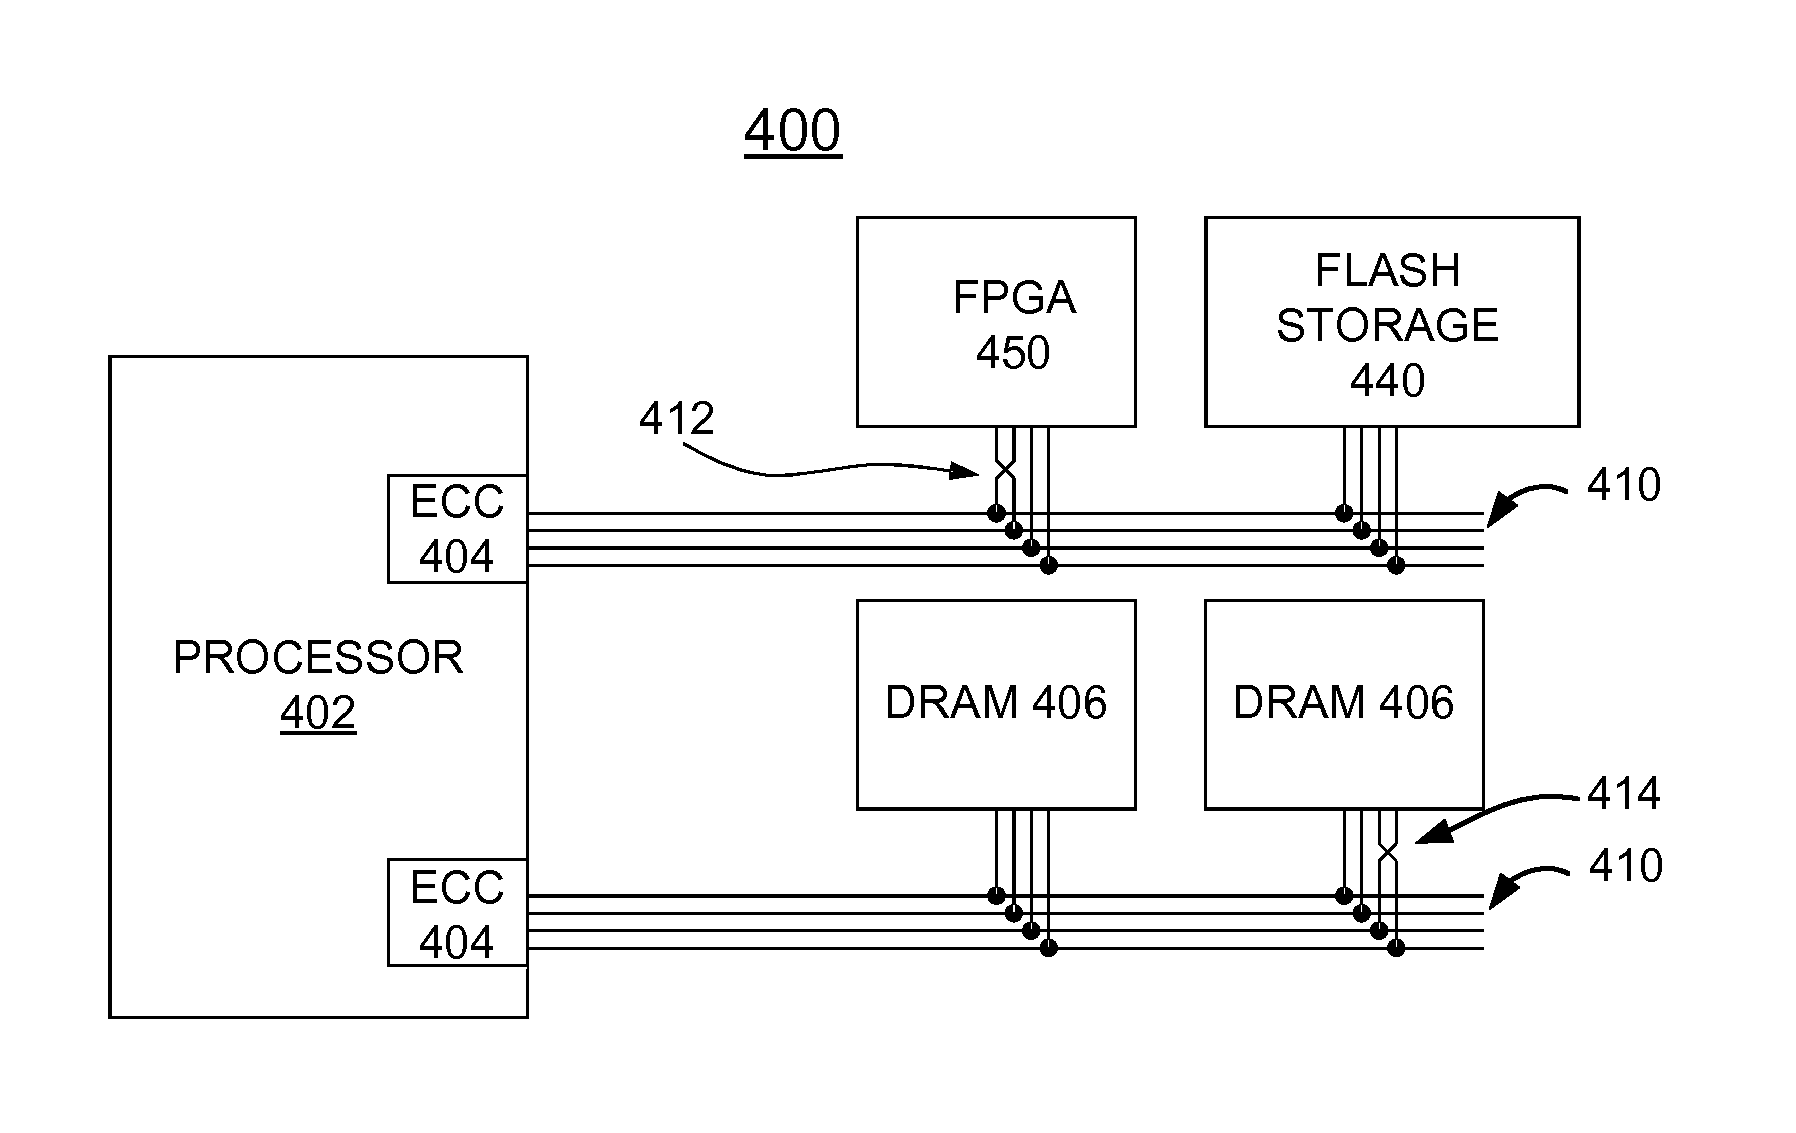 Implementing user mode foreign device attachment to memory channel